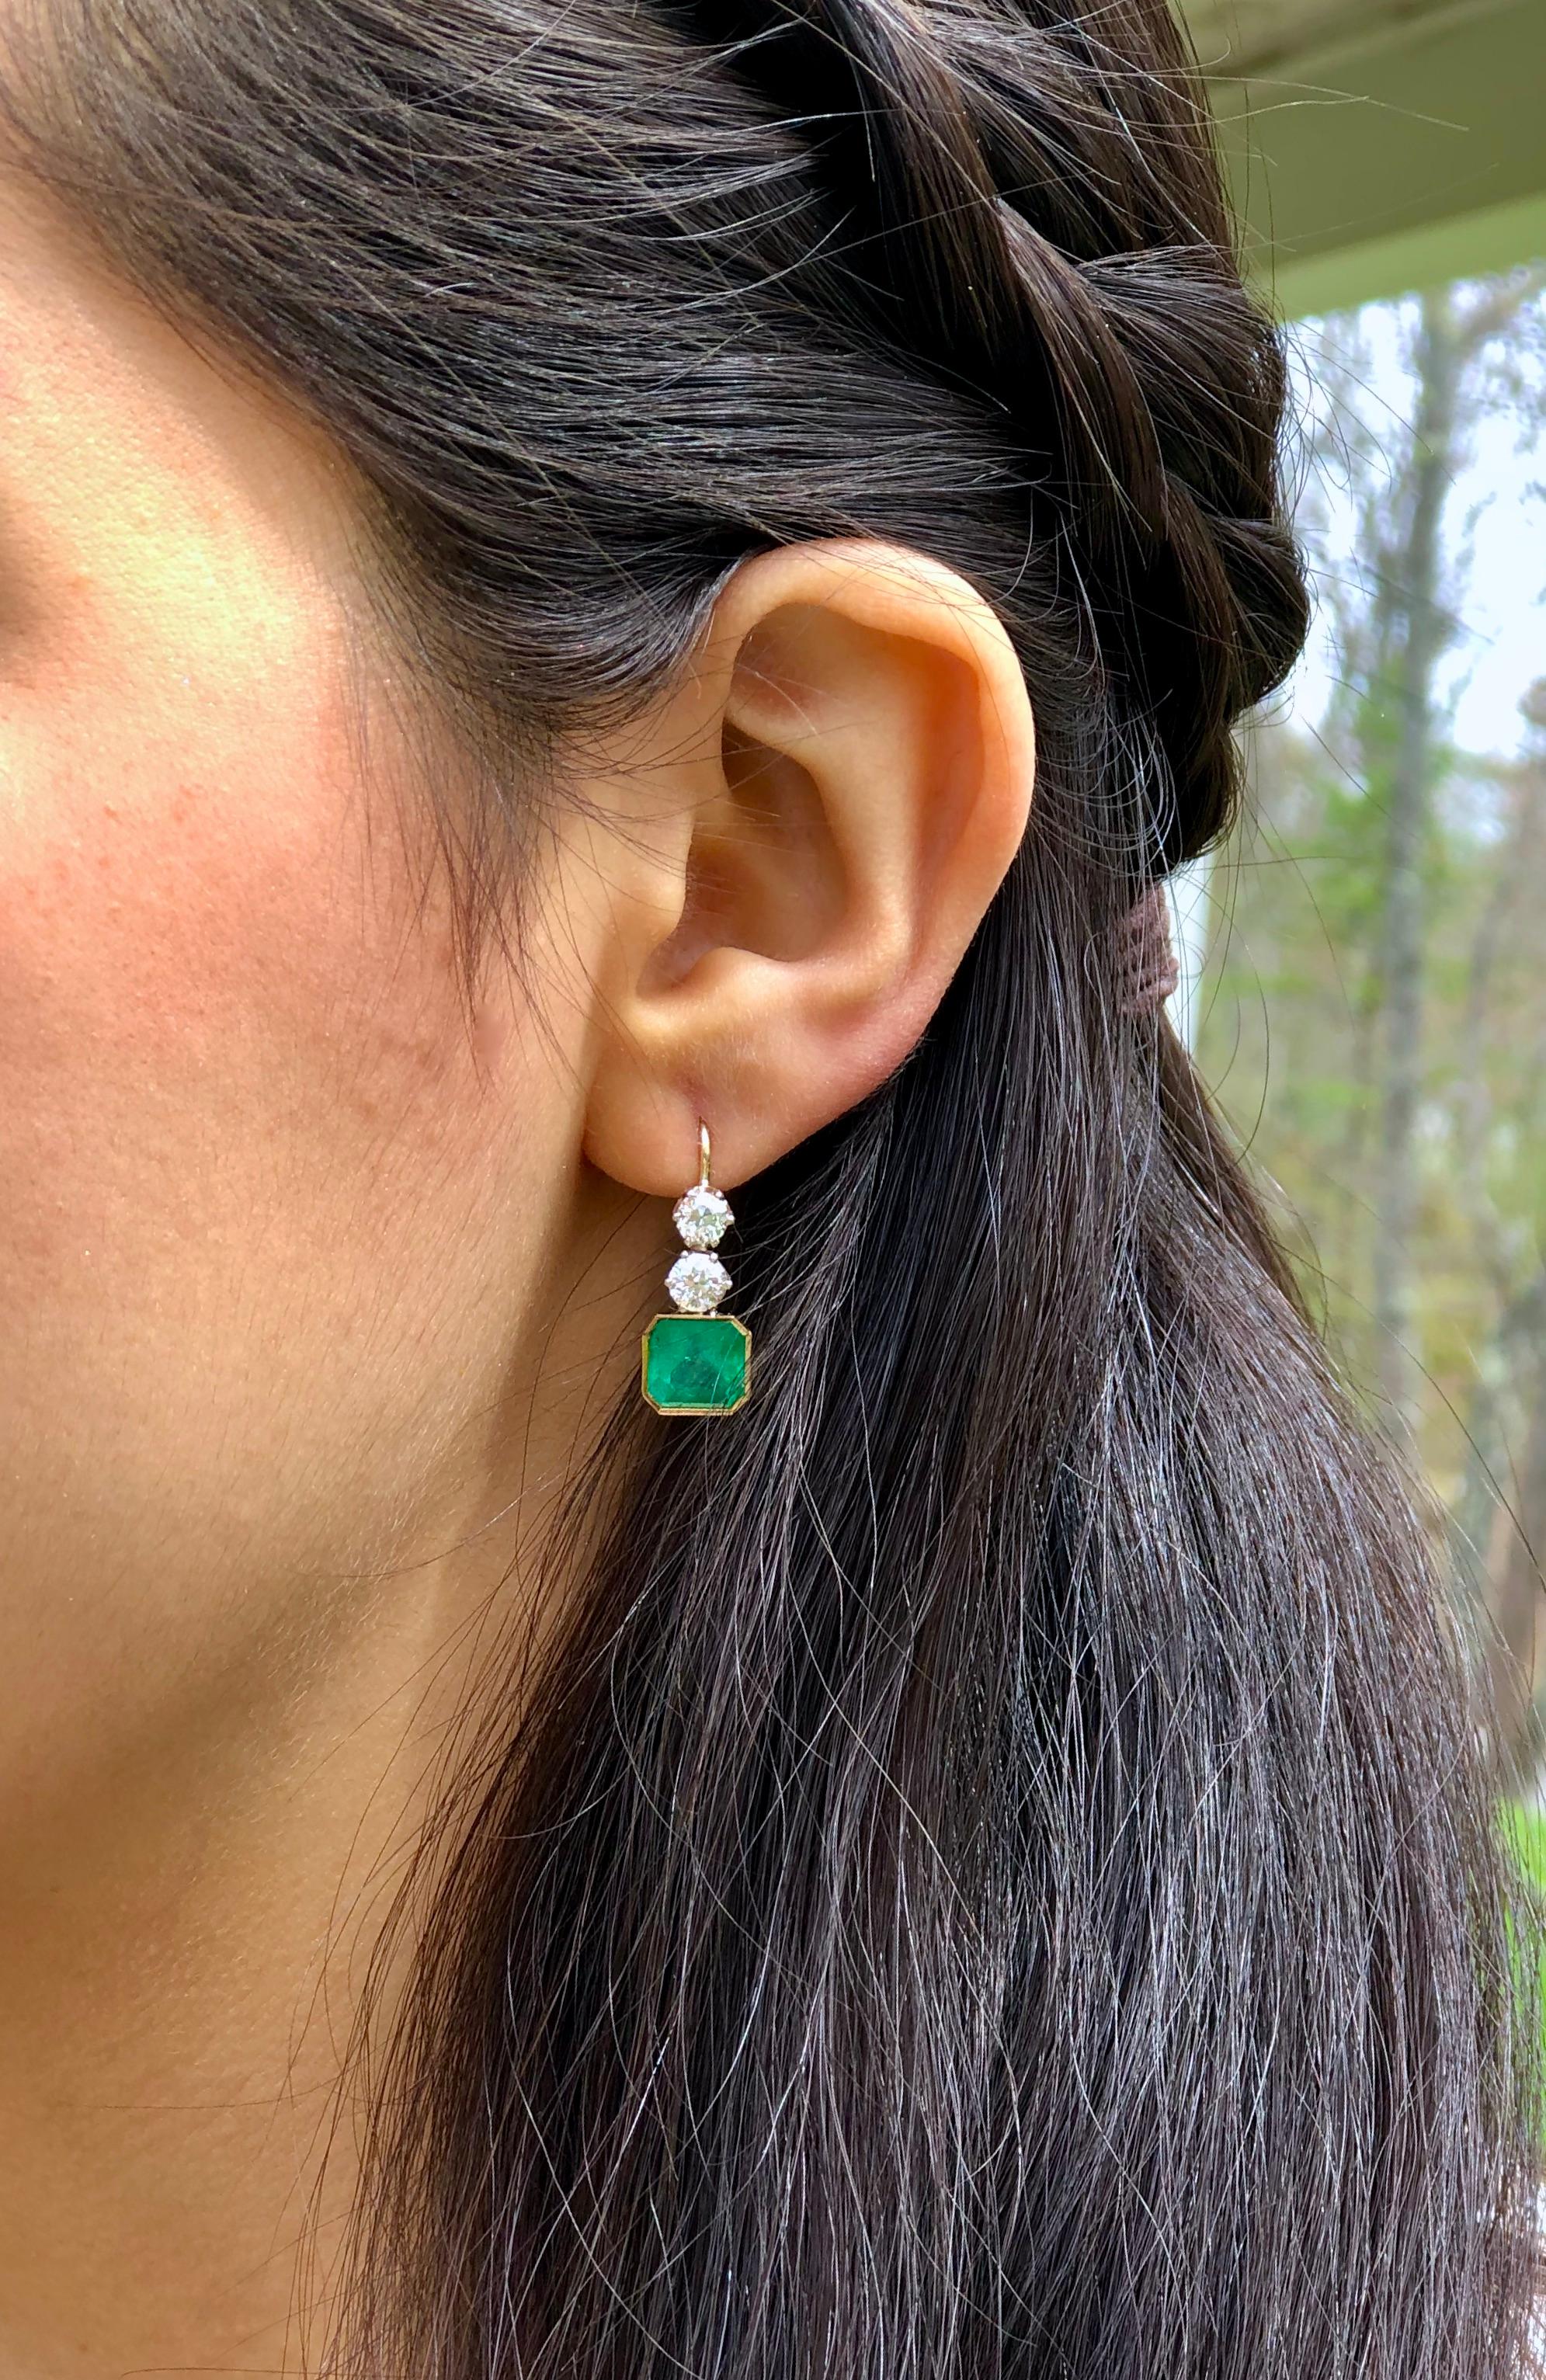 The Gorgeous 5 Carat finest Colombian Emerald Emerald Cut are set in these remarkable 1.60 carat Old European cut diamonds. This exquisite pair of earrings are beautifully crafted with 18K yellow and white gold, feature four old European cut